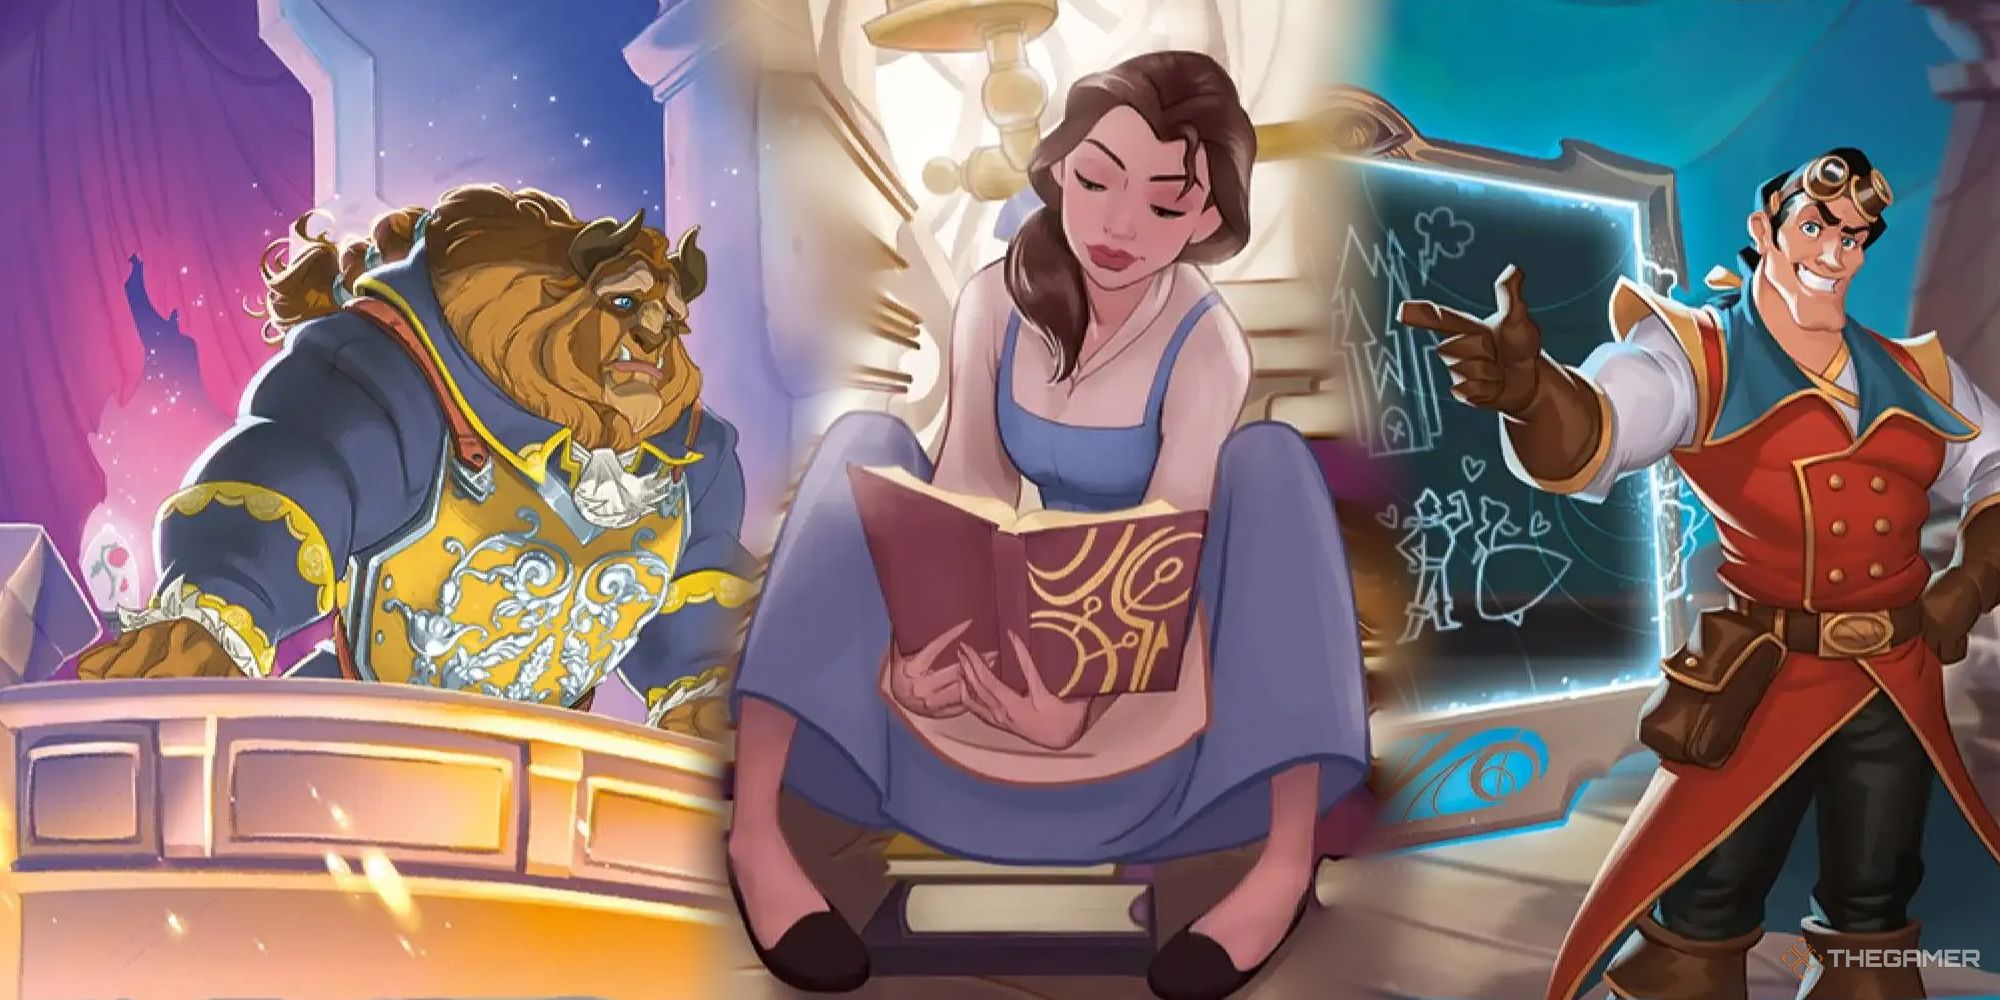 Disney Lorcana combined Beauty And the Beast Cards of Beast, Belle, and Gaston